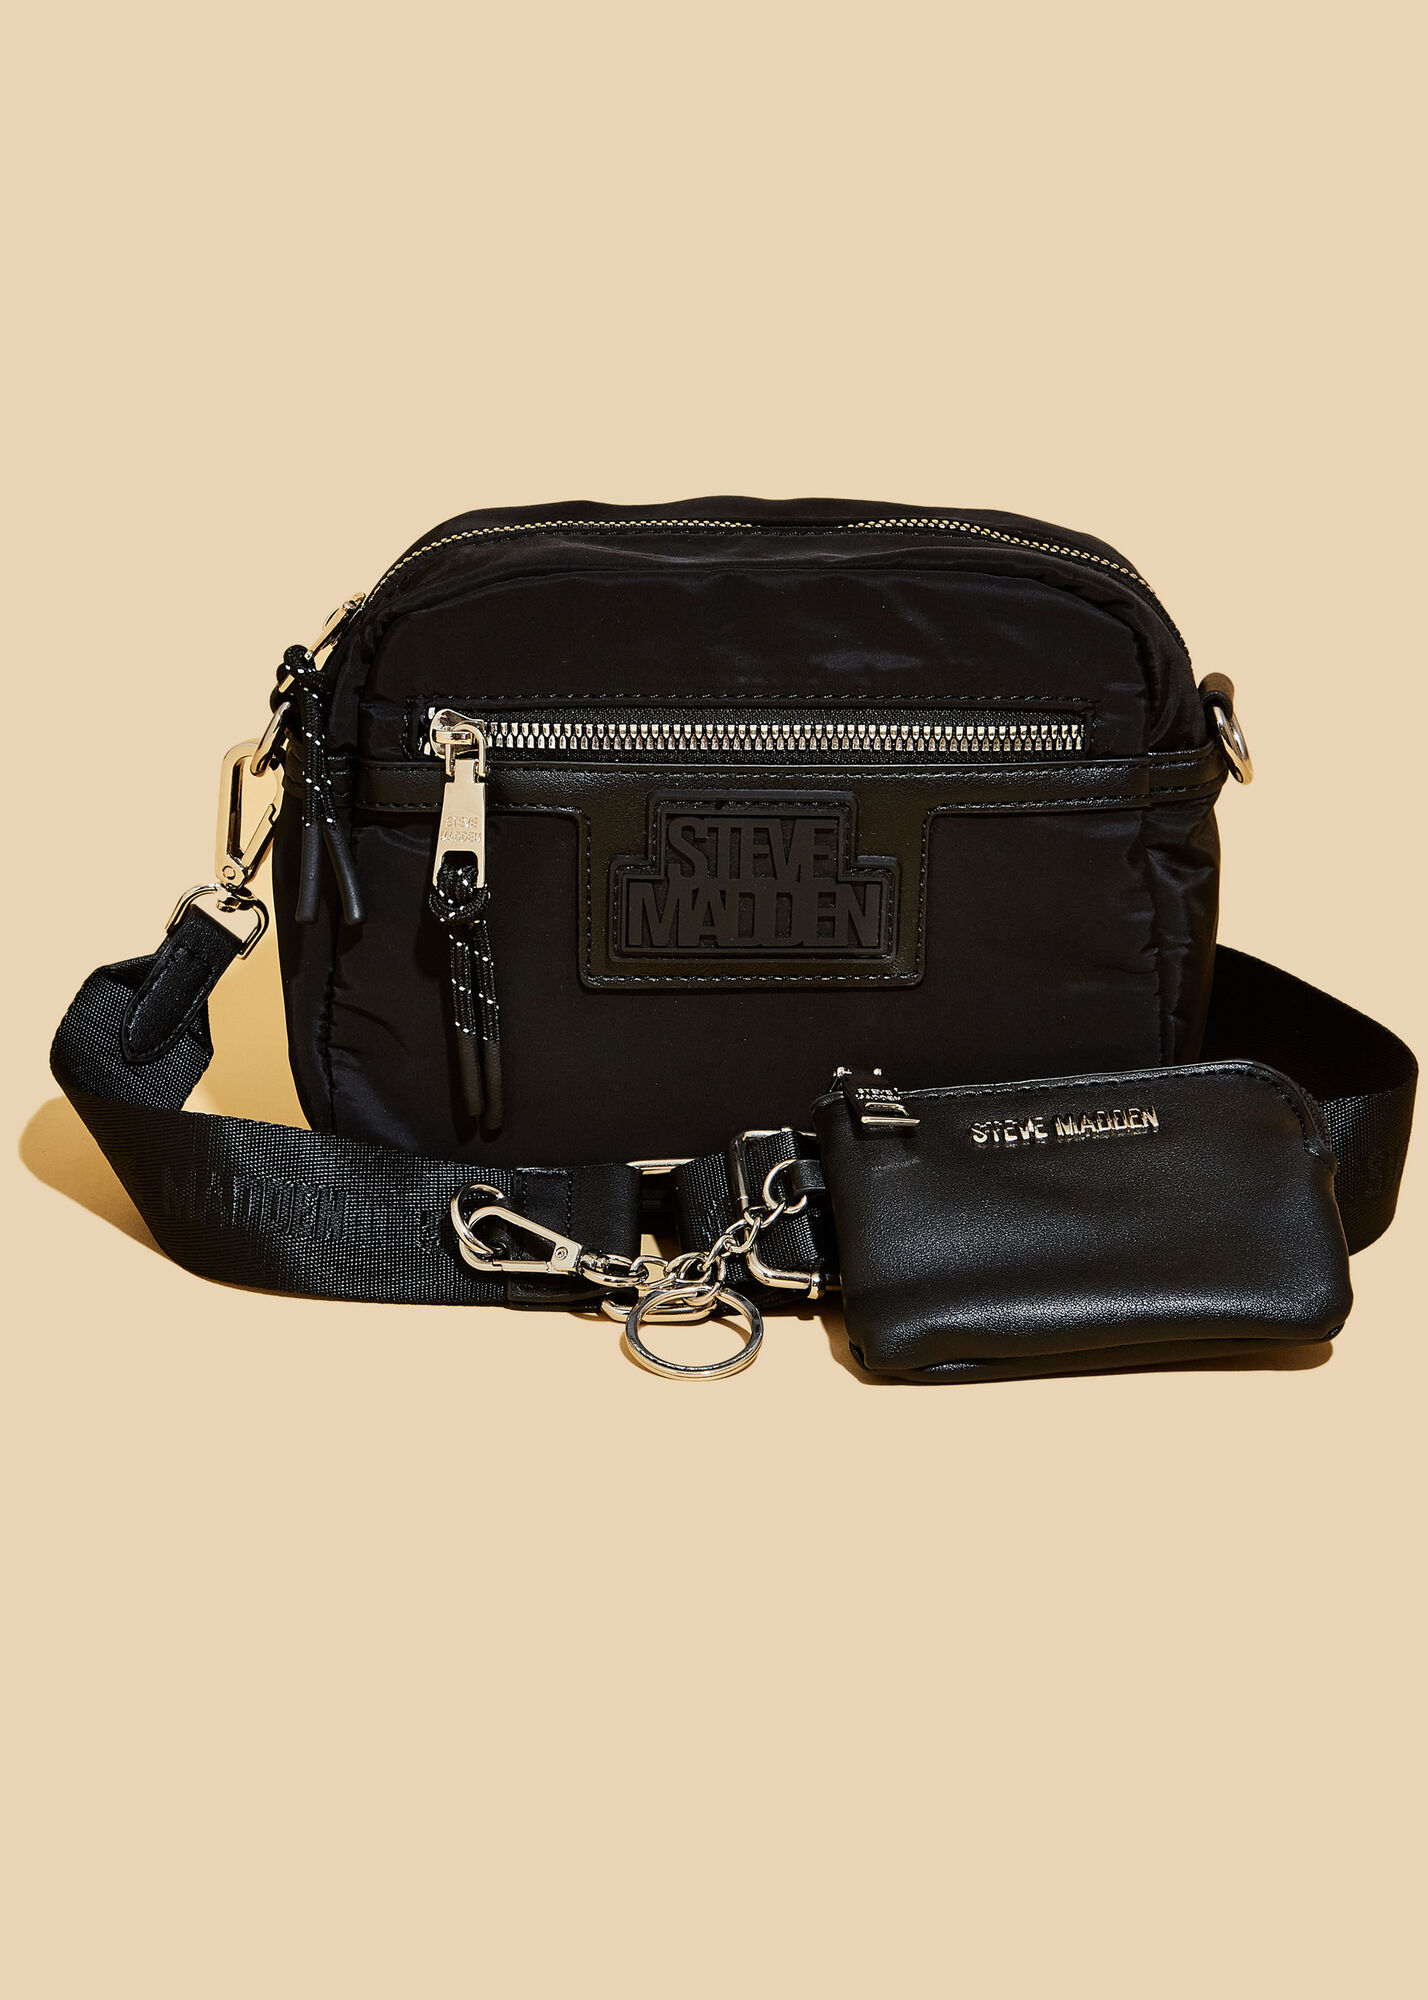 Versace Jeans Couture Crossbody Bags: Style and Functionality